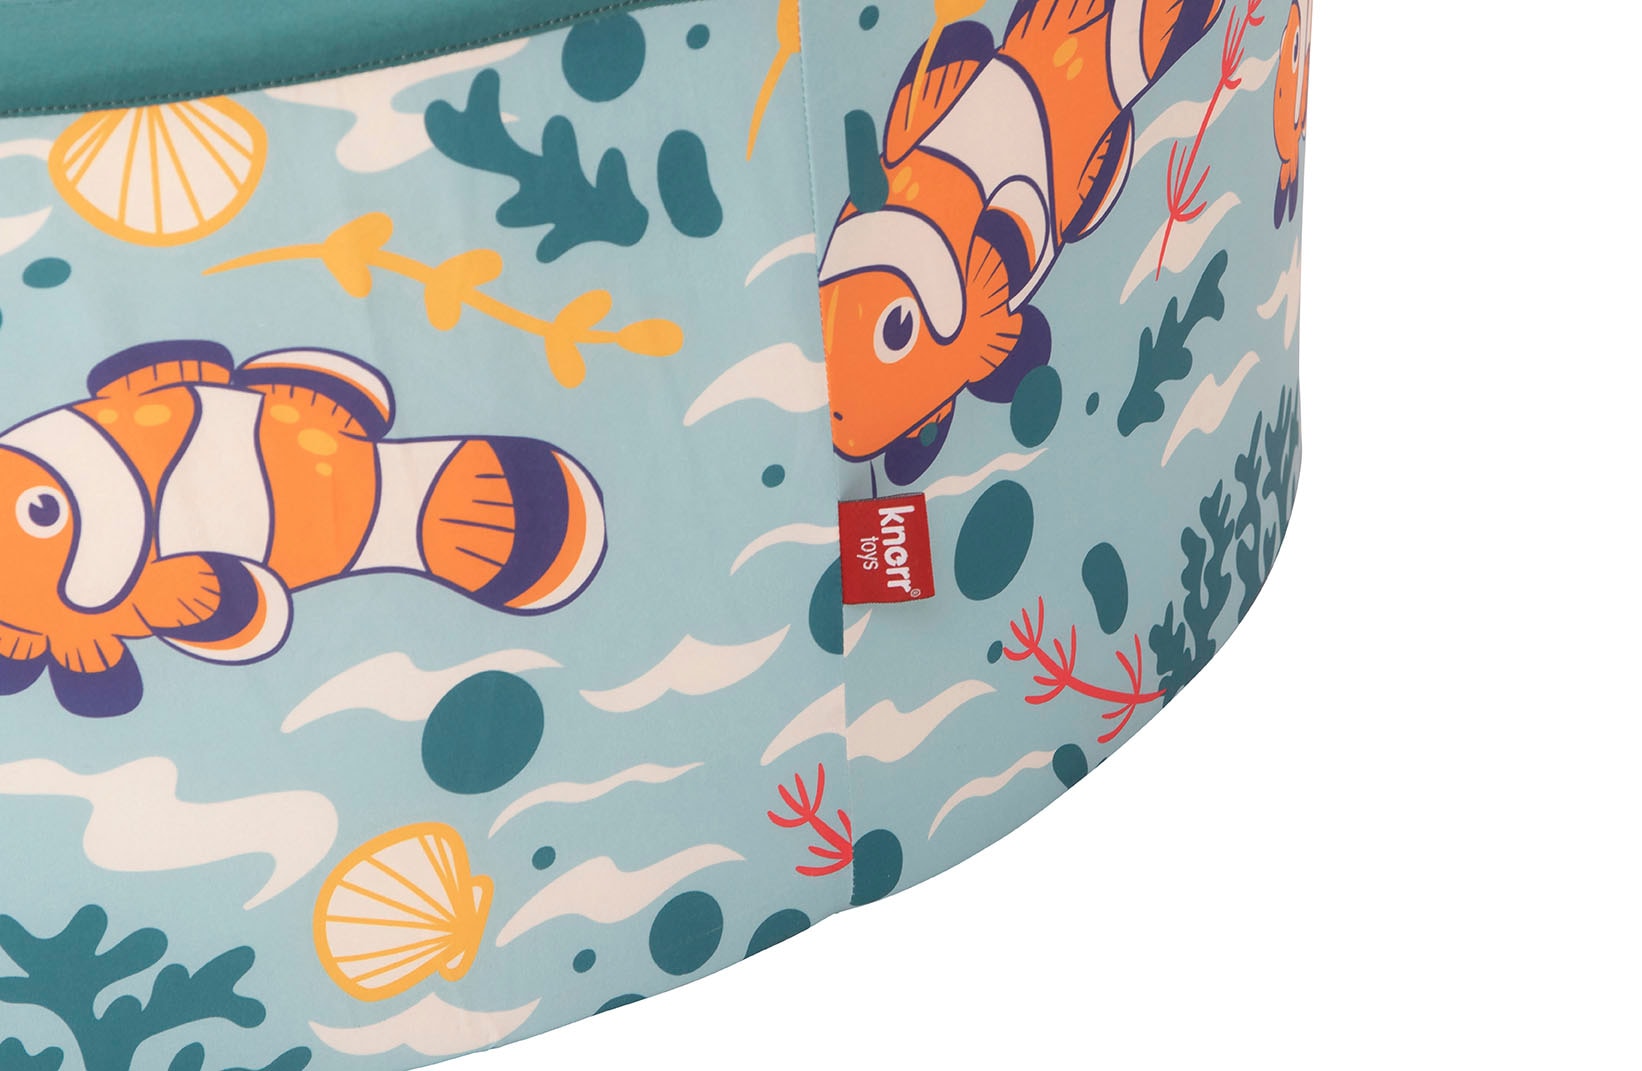 Knorrtoys® Bällebad »Soft, Clownfish«, inklusive 150 Bälle; Made in Europe